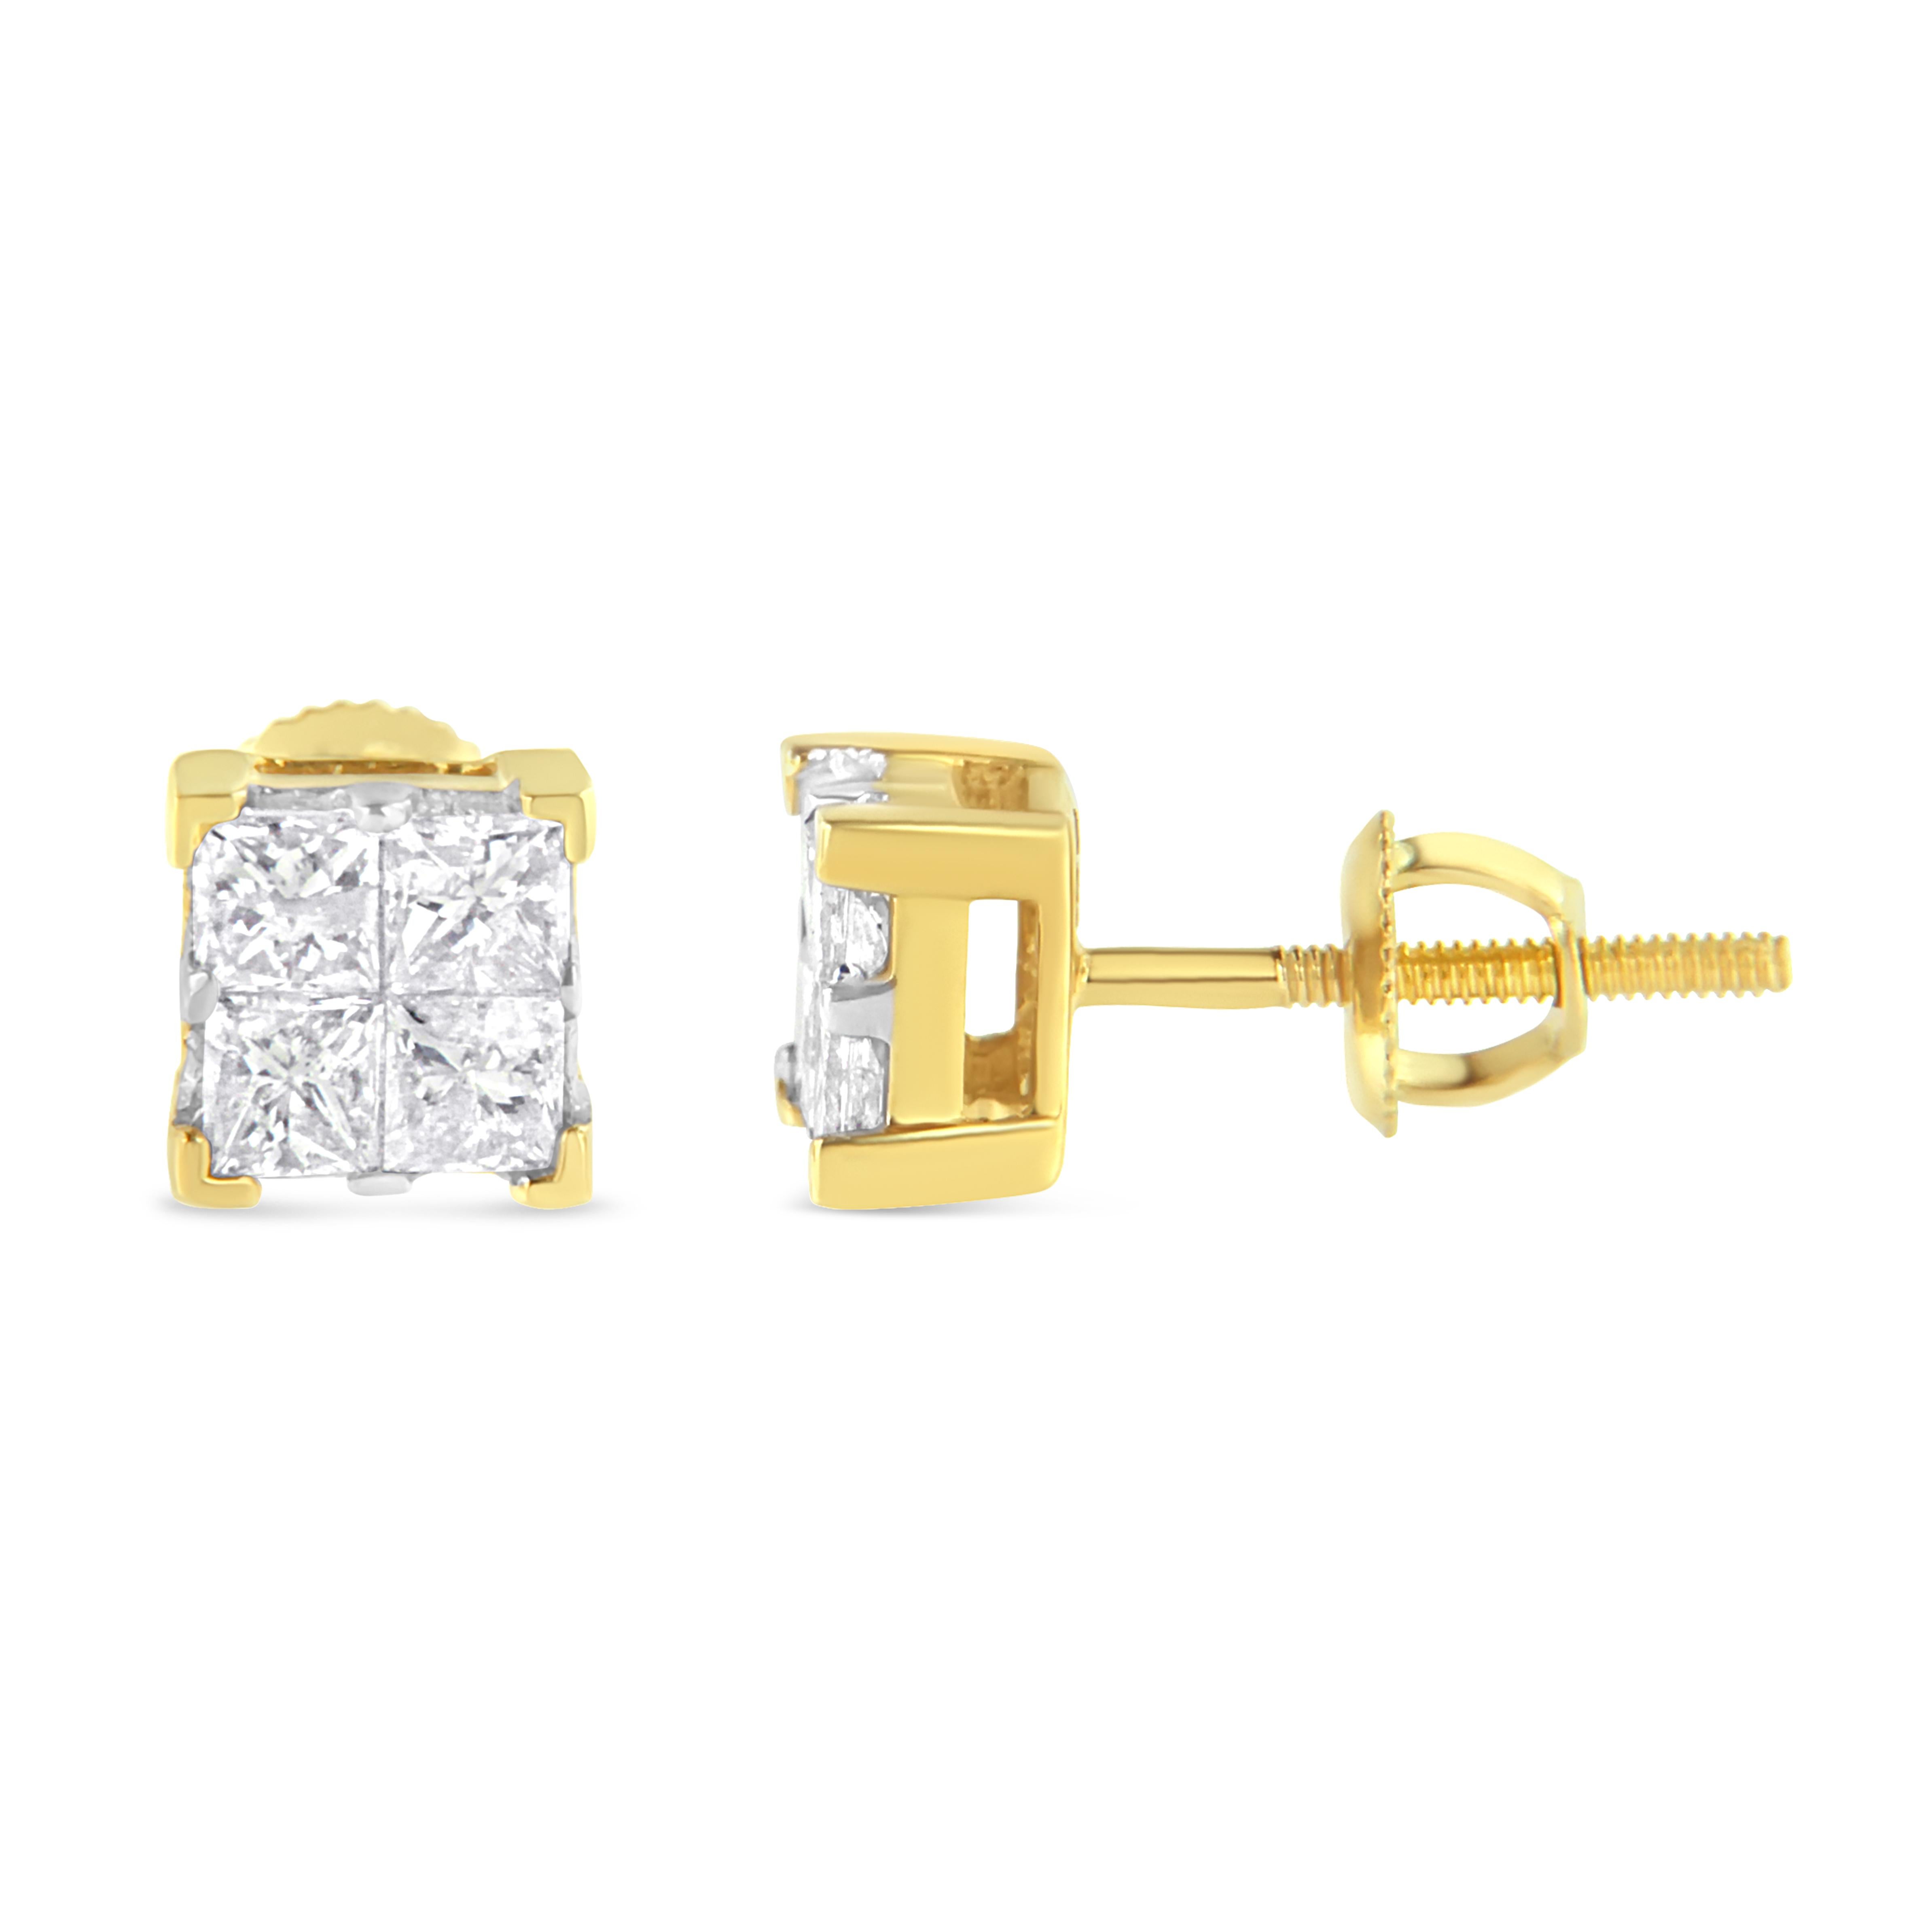 Set the stage for love with these sparkling diamond stud earrings. Crafted in warm 10K yellow gold, each earring features a squared composite of 4 sparkling princess-cut diamonds. Radiant with 3/4 ct. t.w. of diamonds and a brilliant buffed luster,